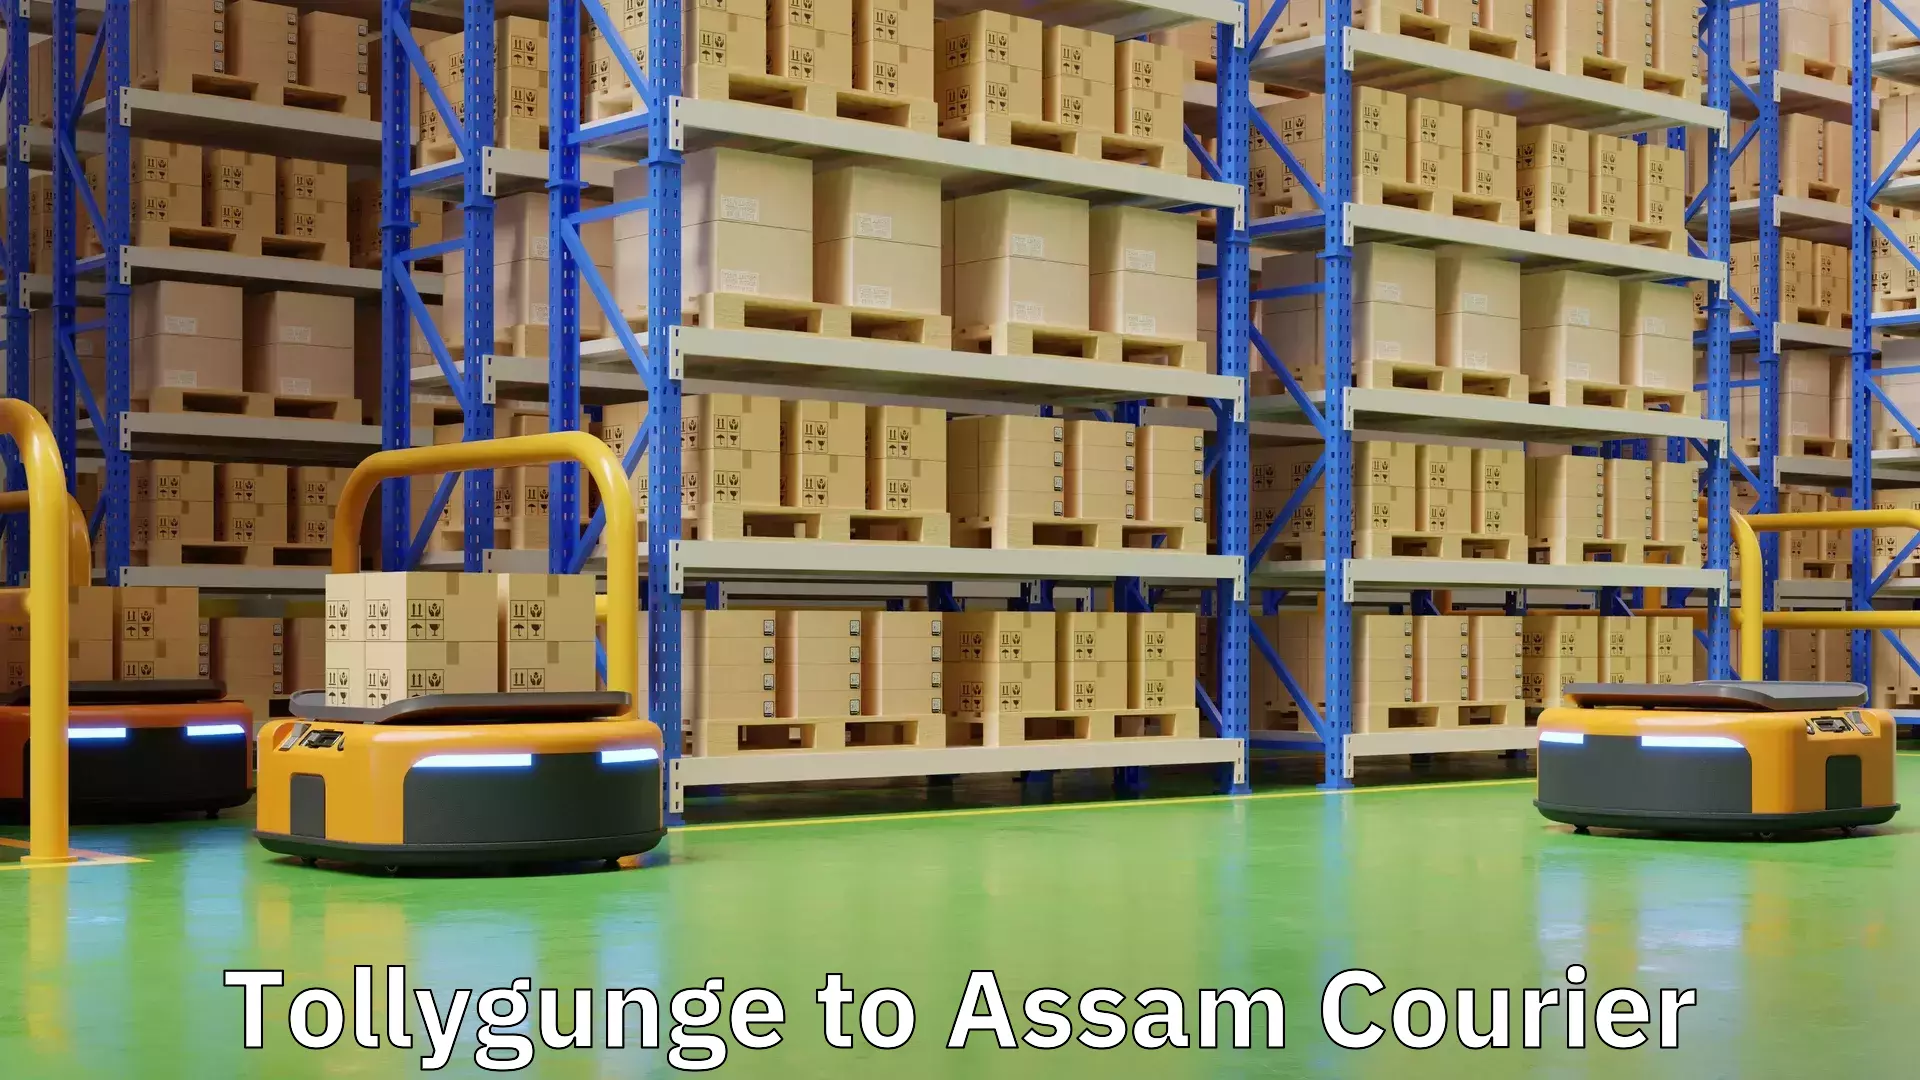 International courier rates in Tollygunge to Assam